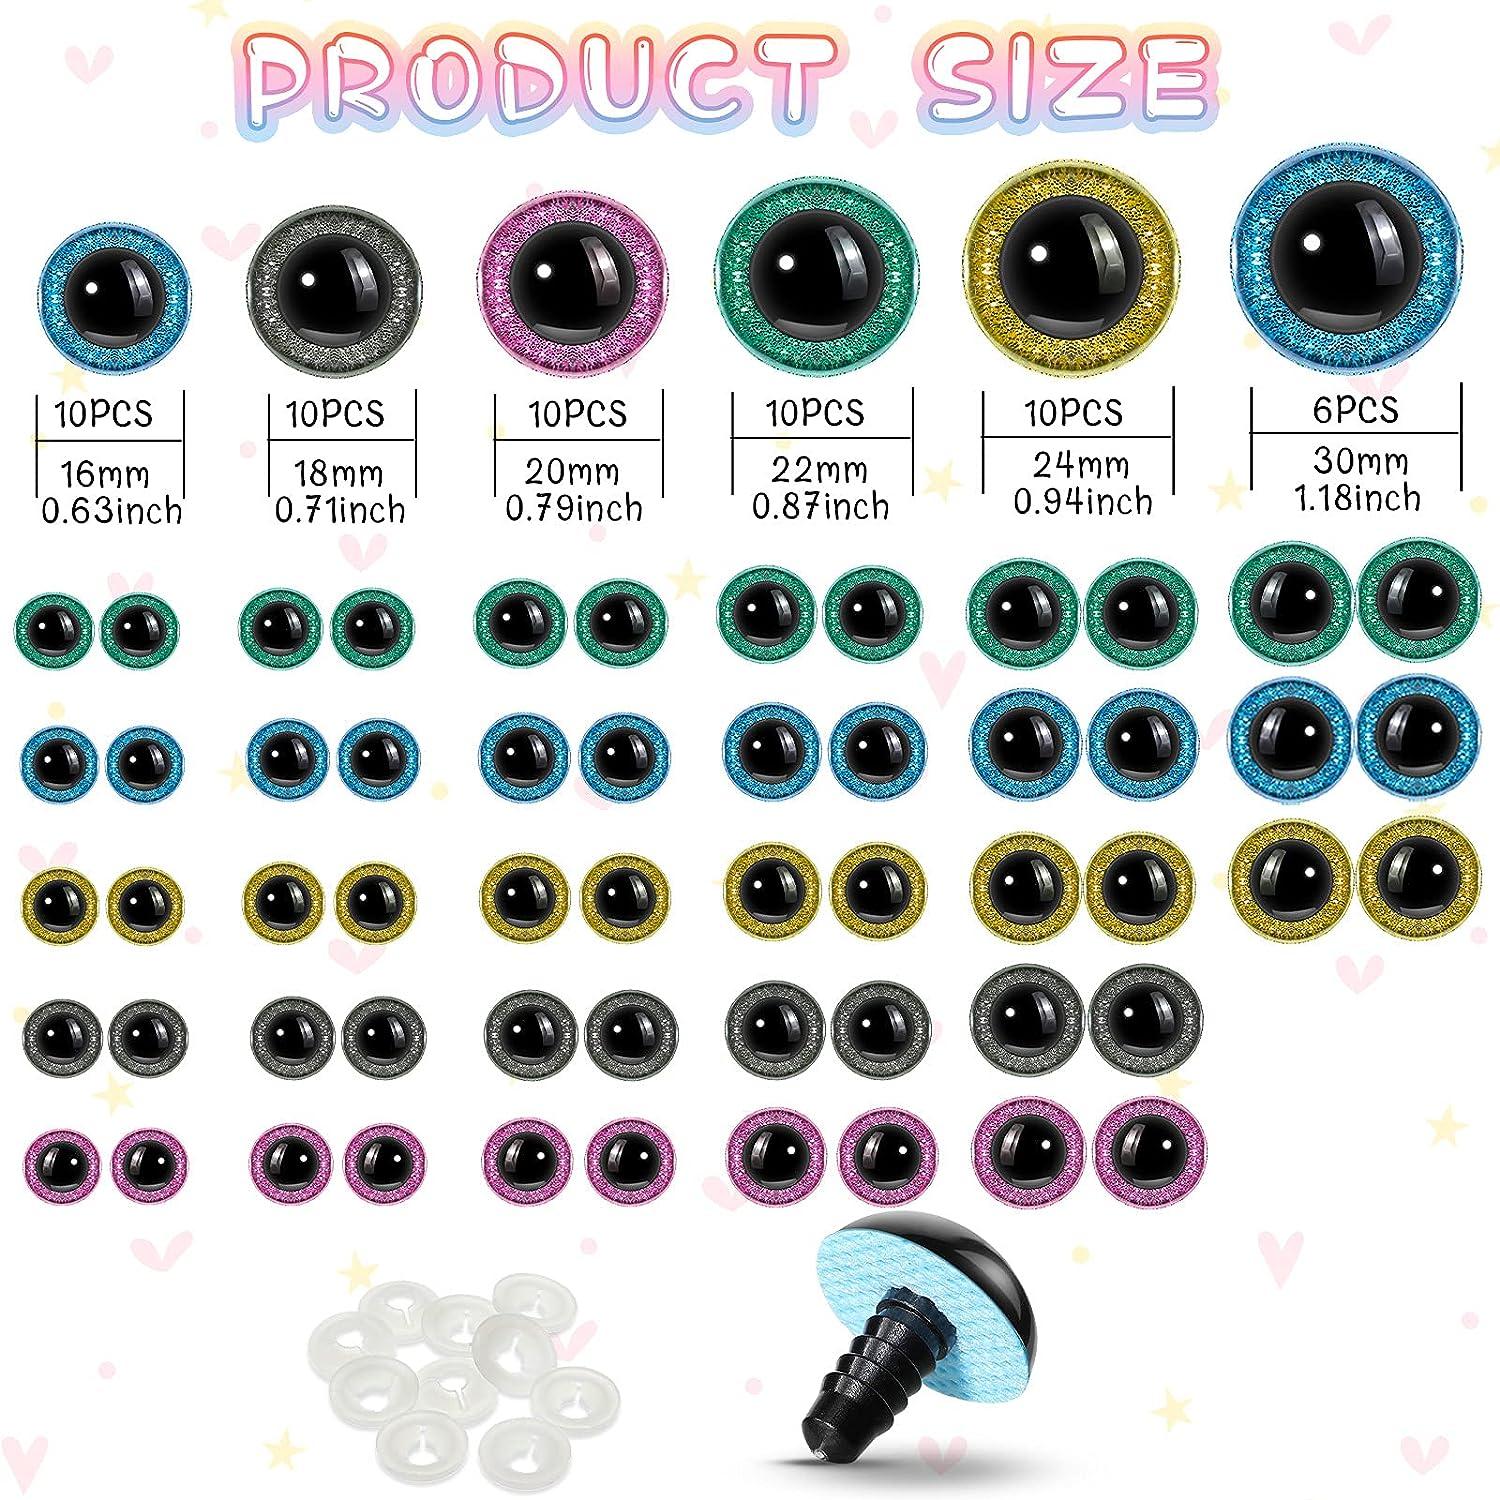 56 Pieces 16-30 mm Large Safety Eyes for Amigurumi Big Stuffed Animal Eyes  Plastic Craft Crochet Eyes for DIY of Puppet Bear Toy Doll Making Supplies  6 Sizes (Green Grey Yellow Pink Blue)